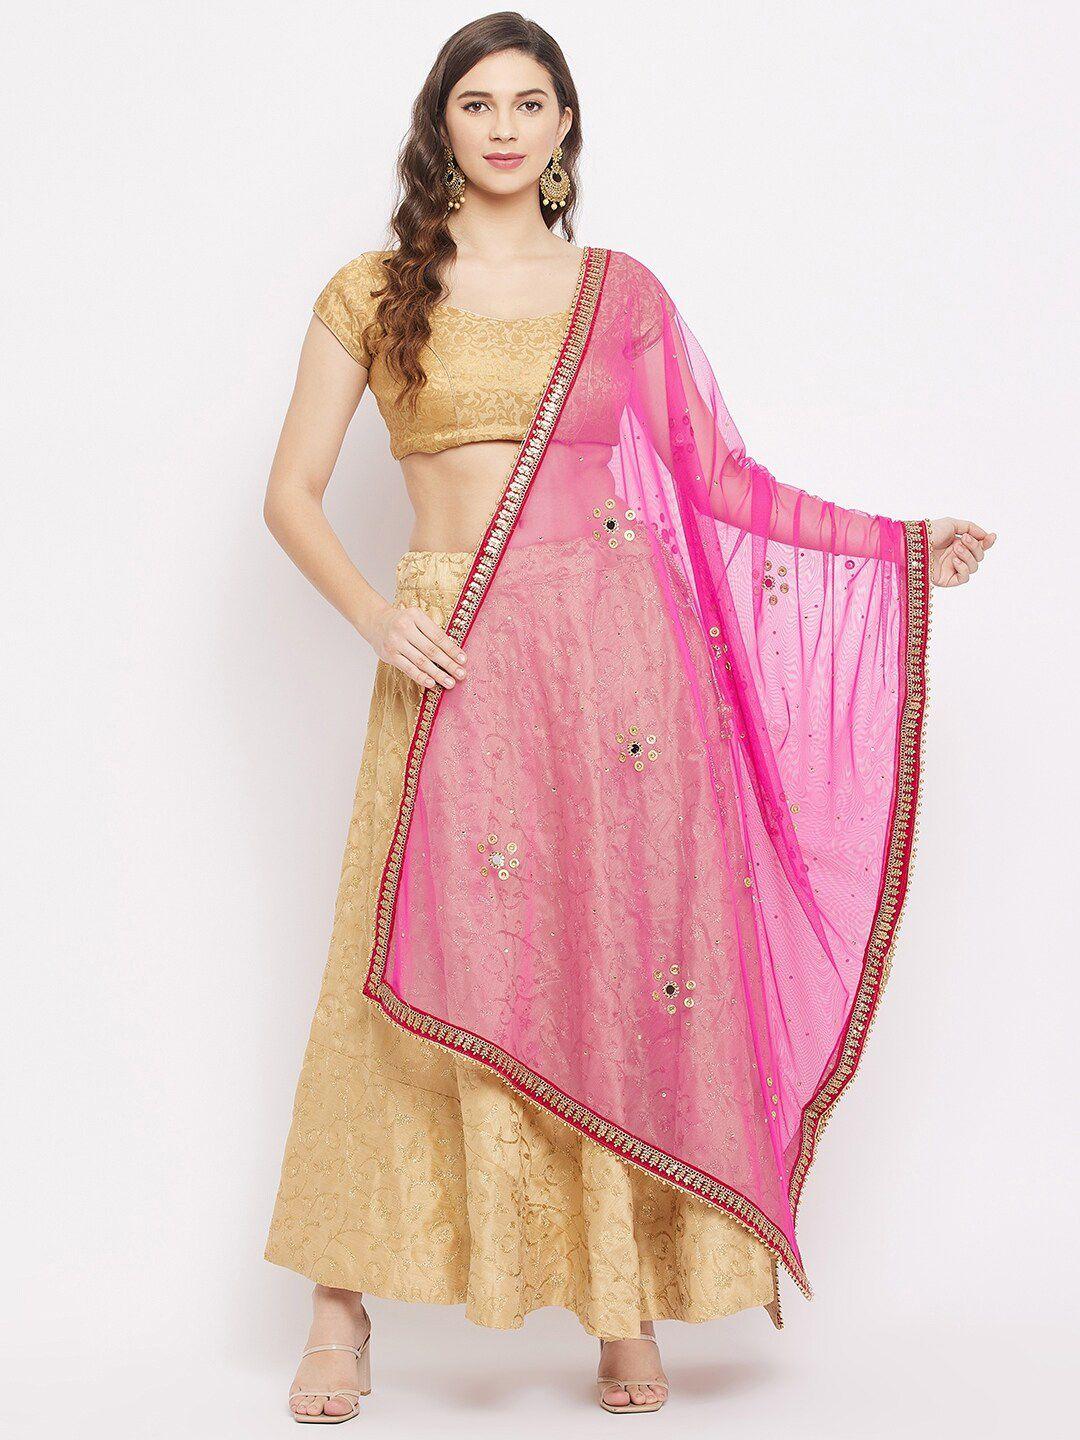 clora-creation-magenta-&-gold-embroidered-foil-print-dupatta-with-beads-and-stones